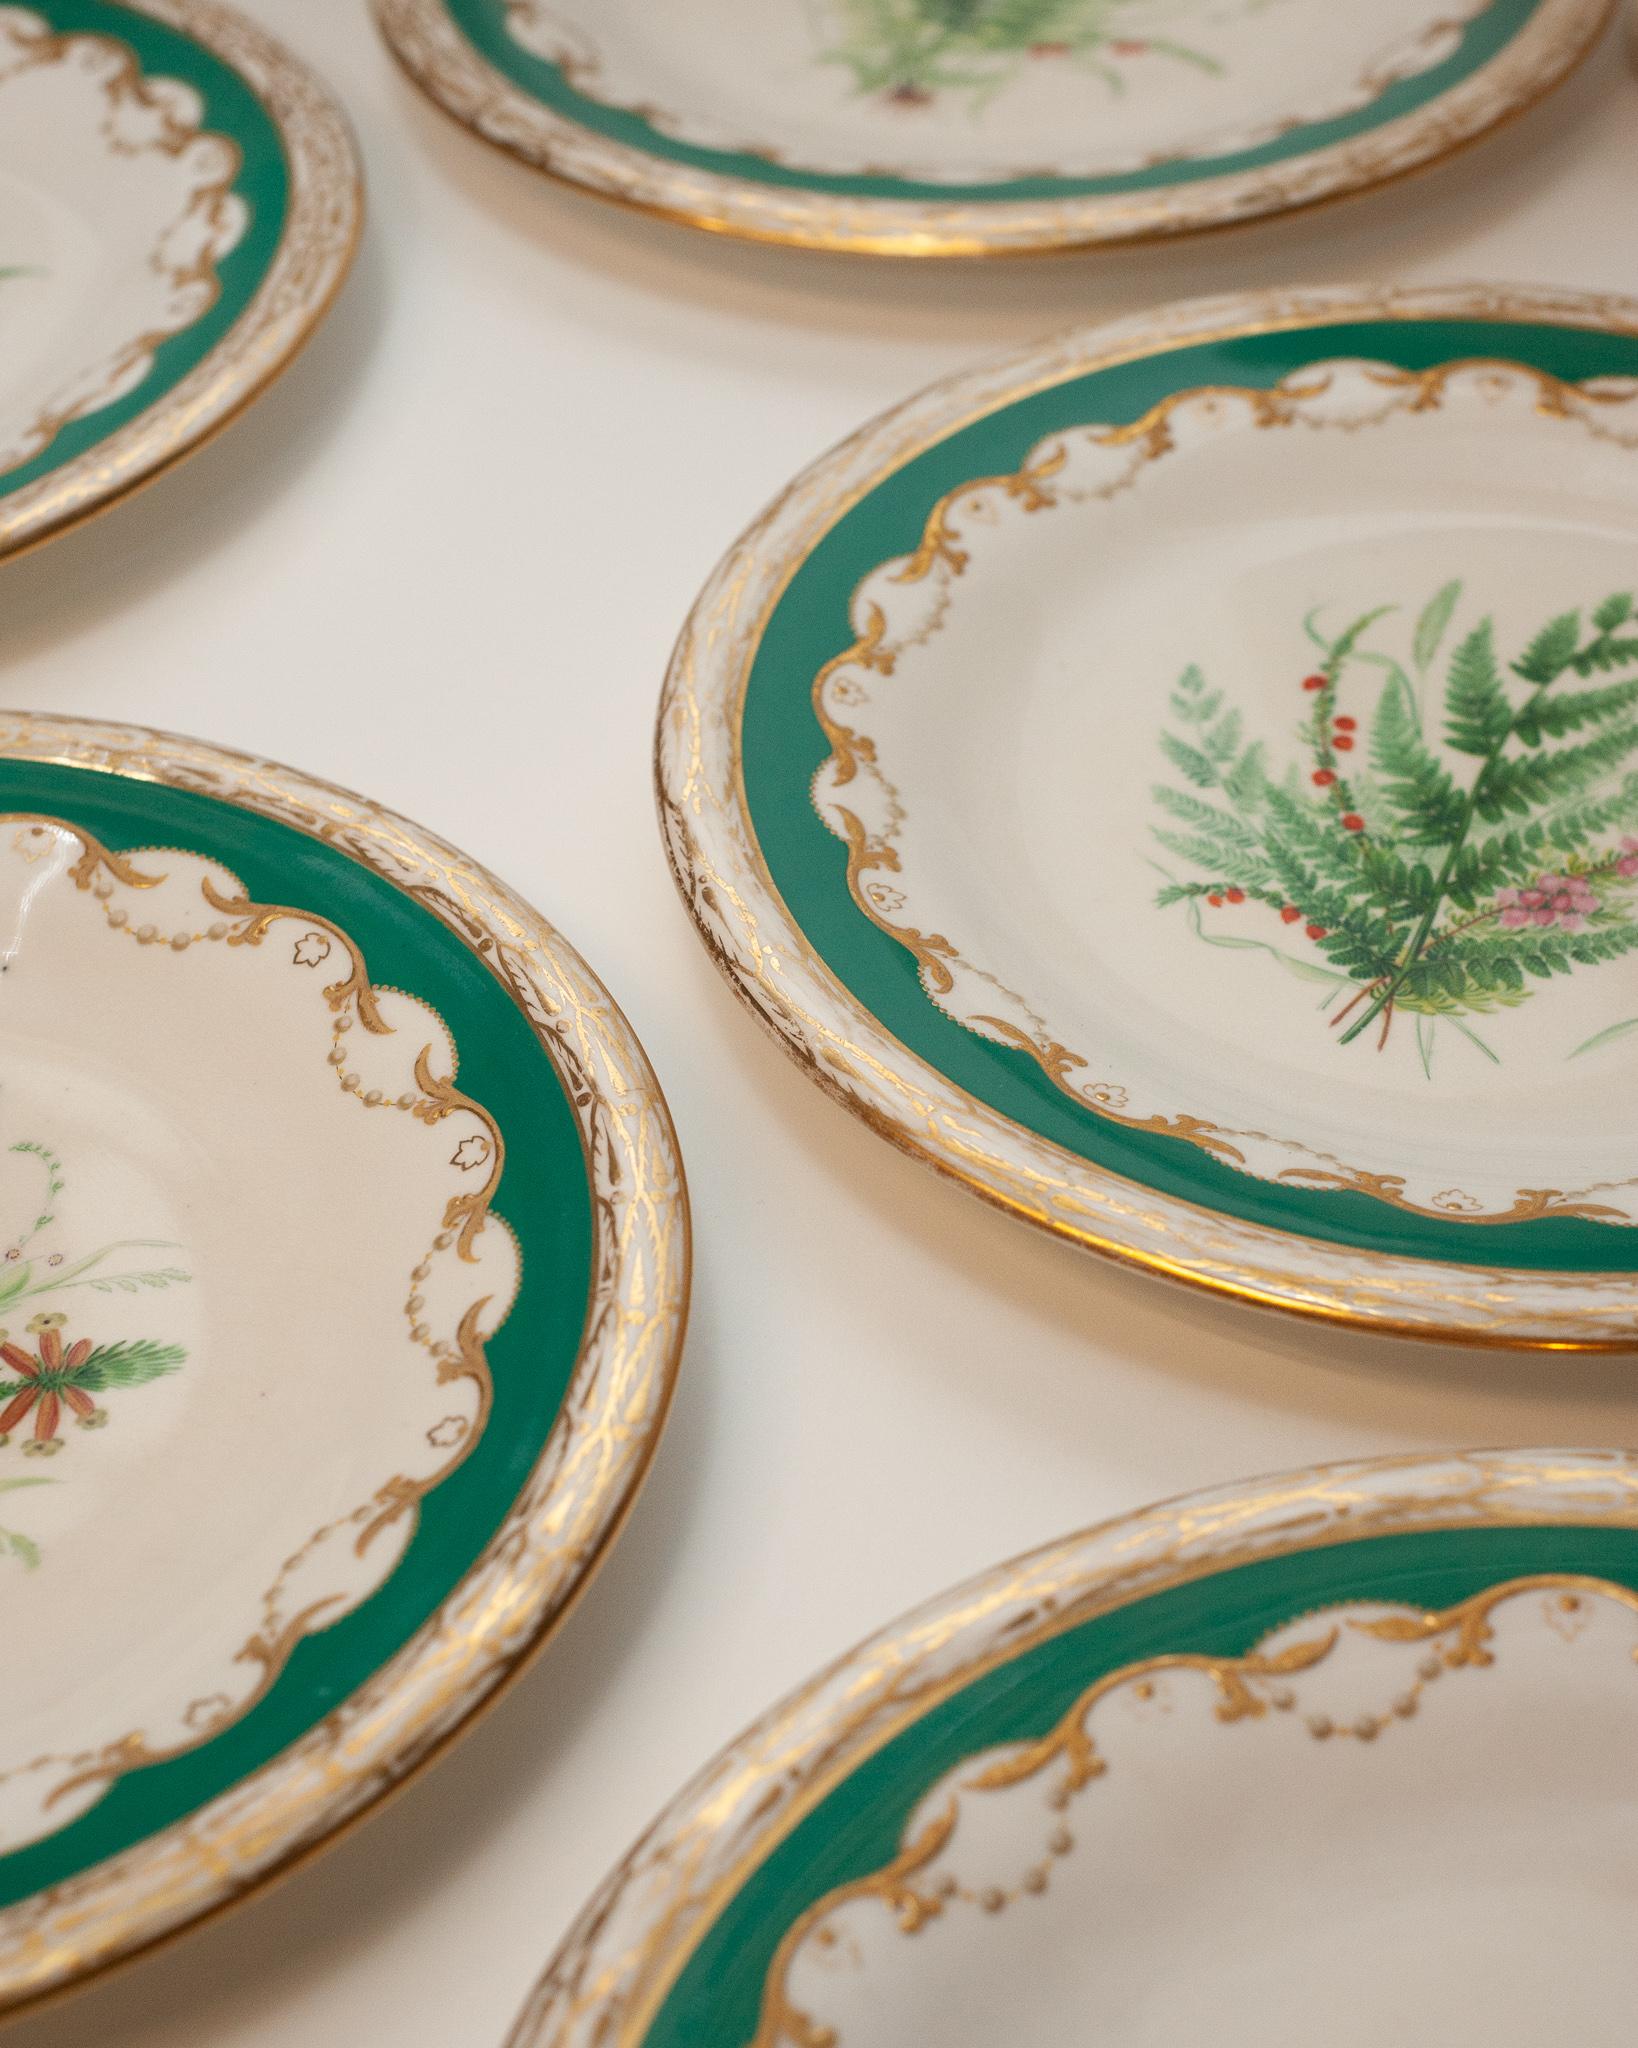 Antique English Floral Dishes Set of Tall and Short Tazzas and Dessert Plates In Good Condition For Sale In Toronto, ON